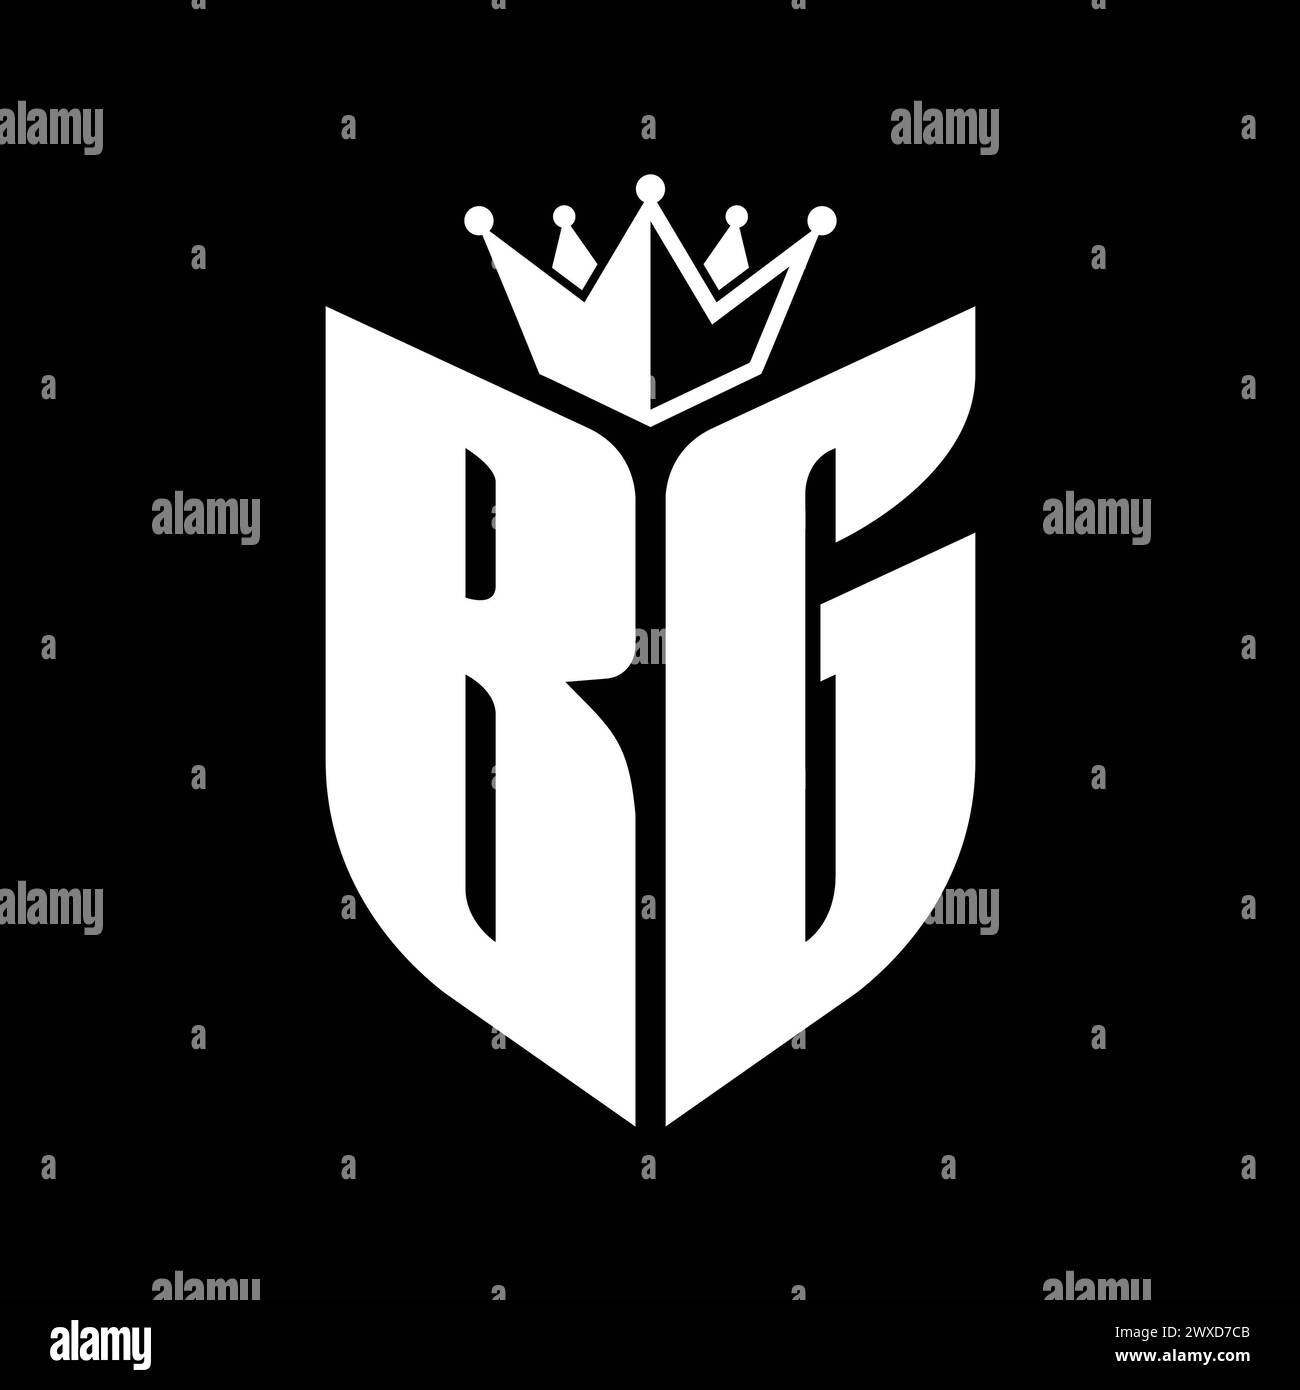 BG Letter monogram with shield shape with crown black and white color design template Stock Photo